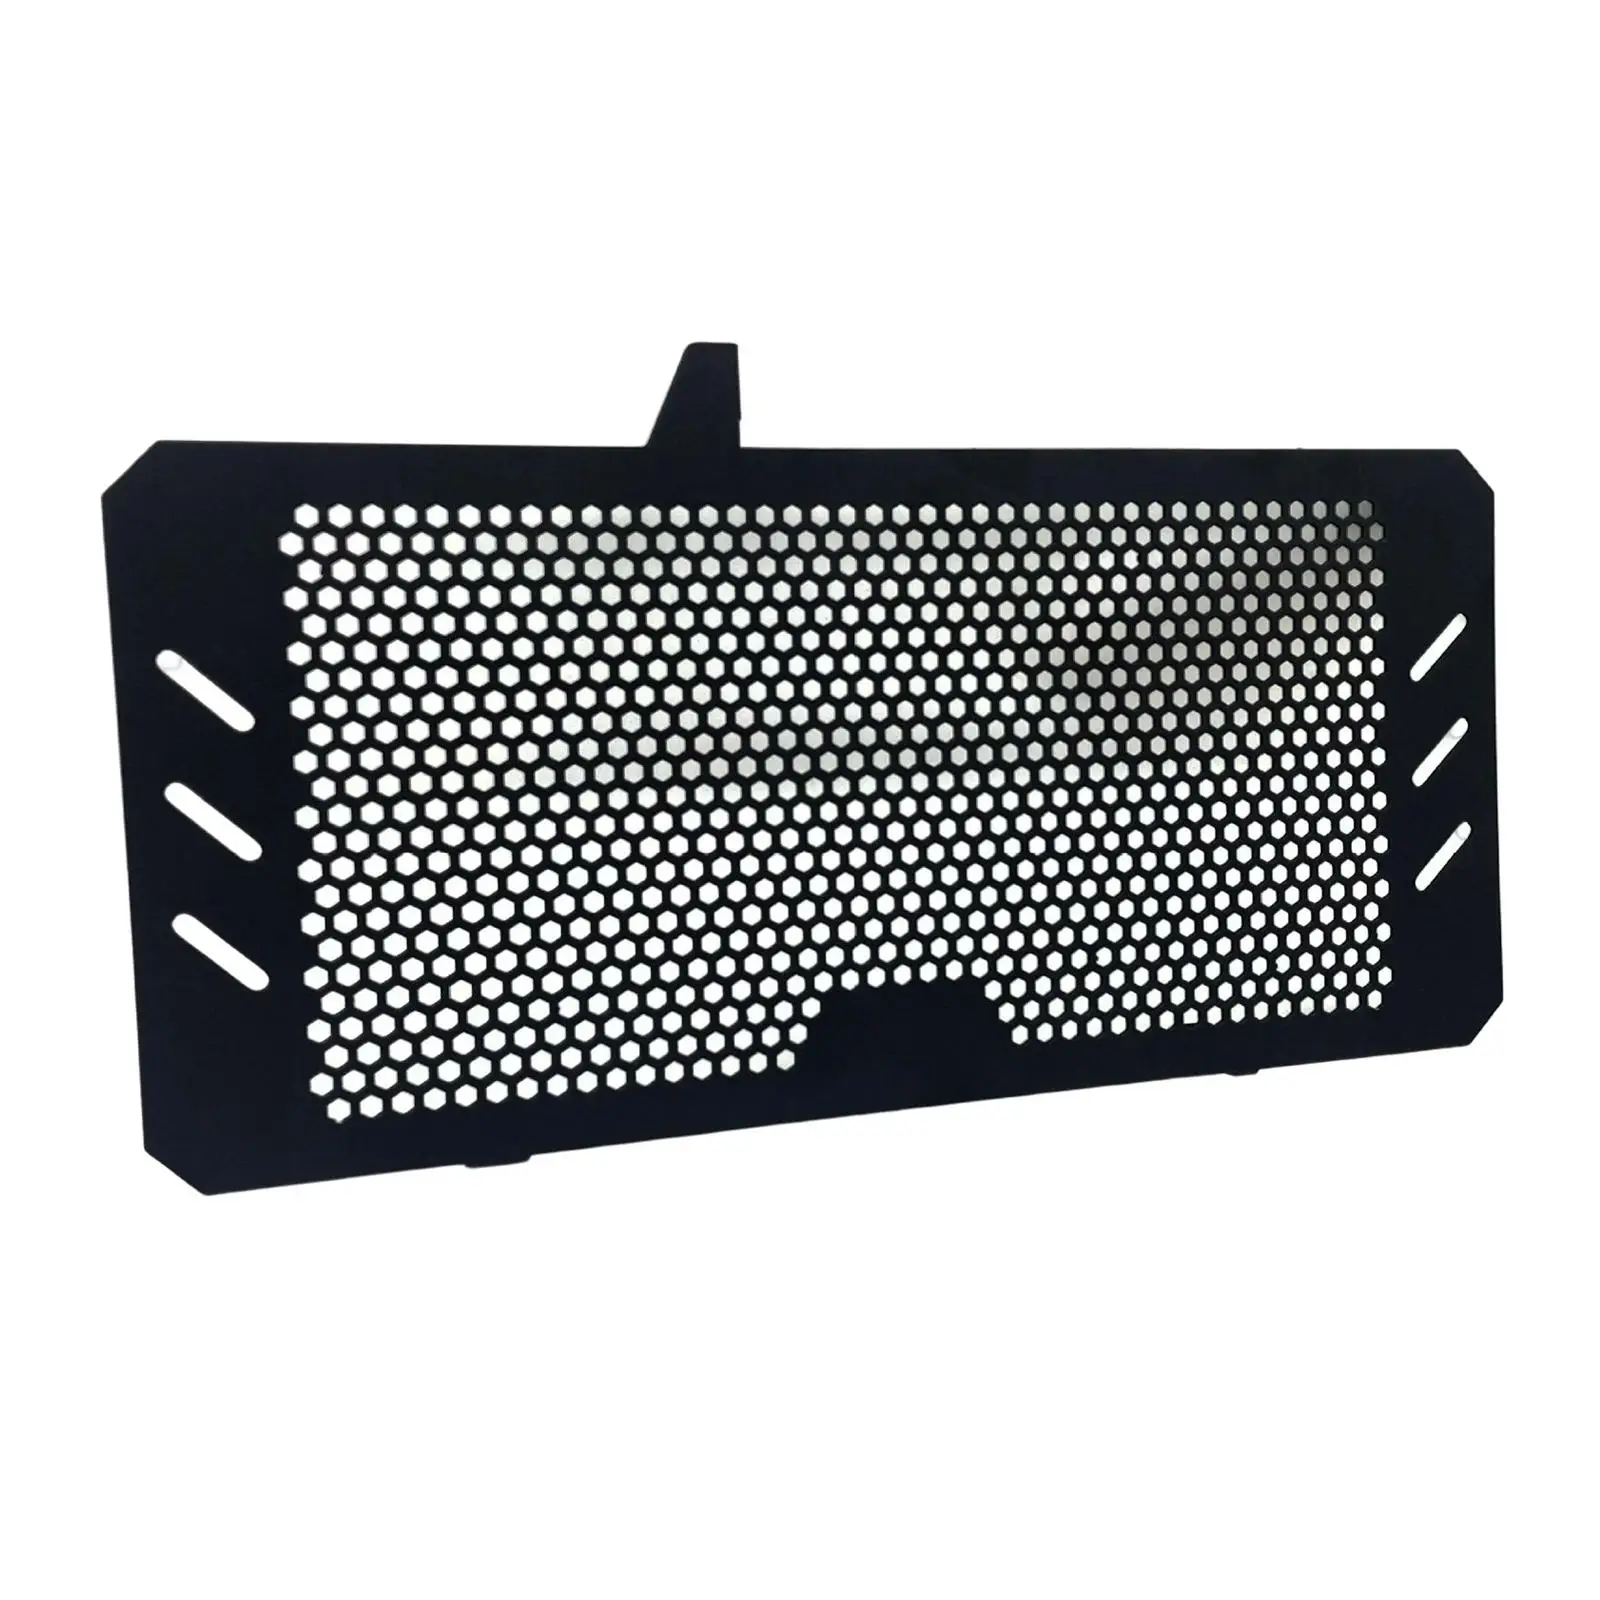 

Motorbike Motorcycle Grille Guard for NC750 S / x